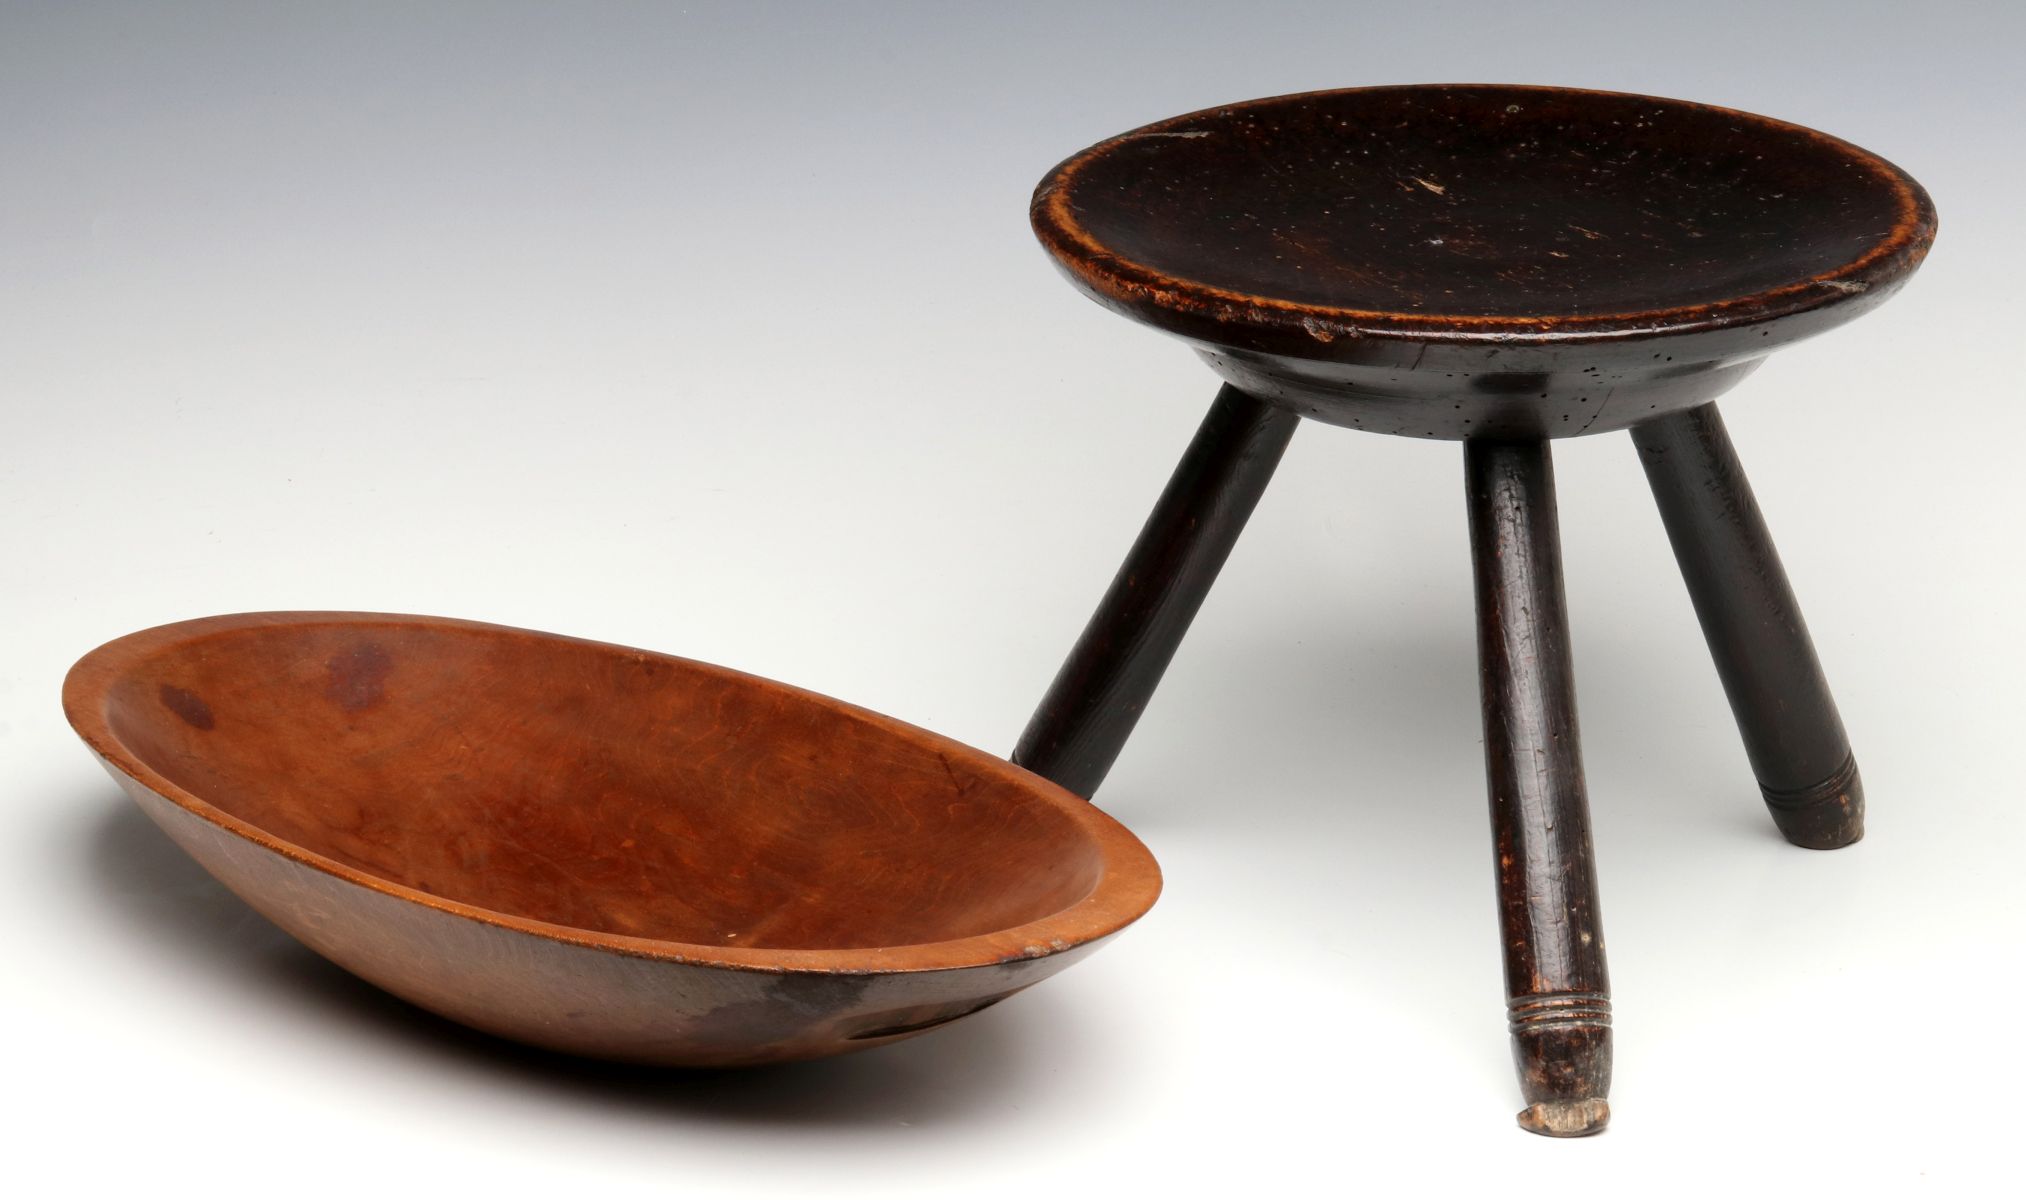 AN EARLY STTOL IN BLACK STAIN WITH PRIMITIVE OVAL BOWL